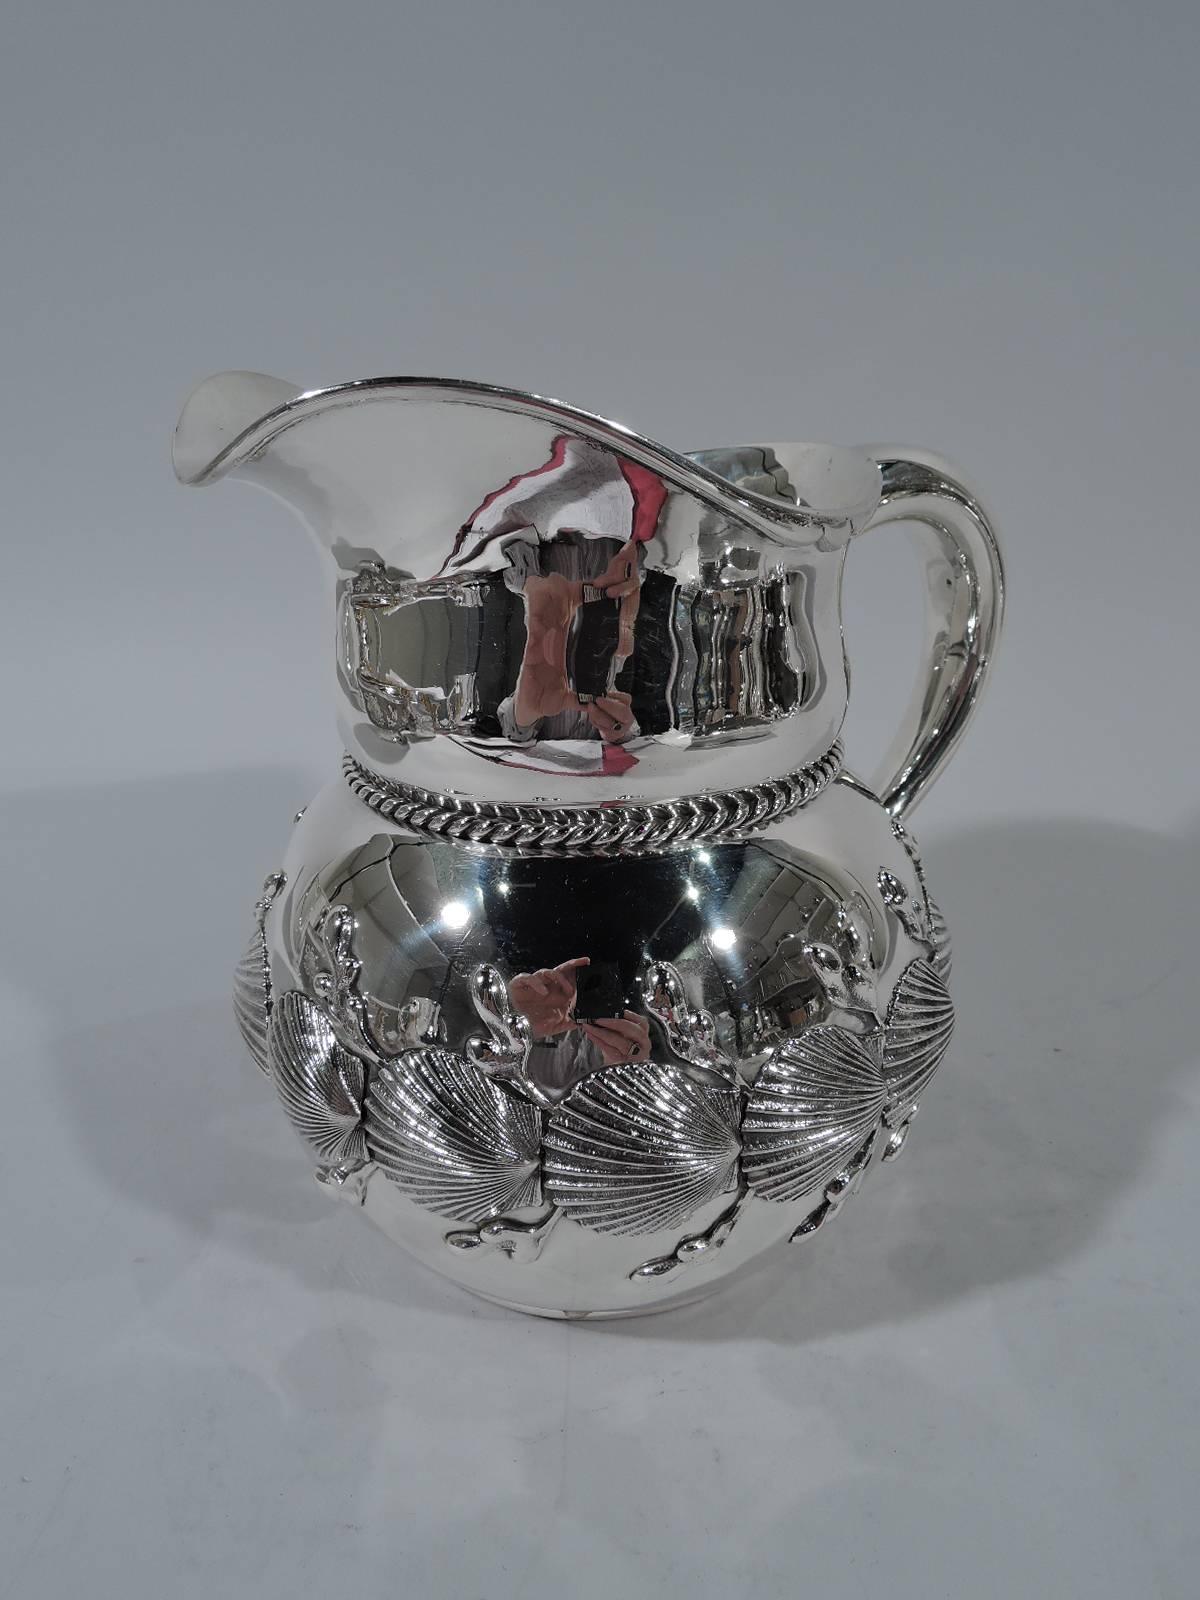 Wonderful marine sterling silver water pitcher. Made by Theodore B. Starr in New York, circa 1885. Globular with curved neck, helmet mouth, and c-scroll handle. Band of scallop shells and algae applied to body. Rope applied to neck base. A great